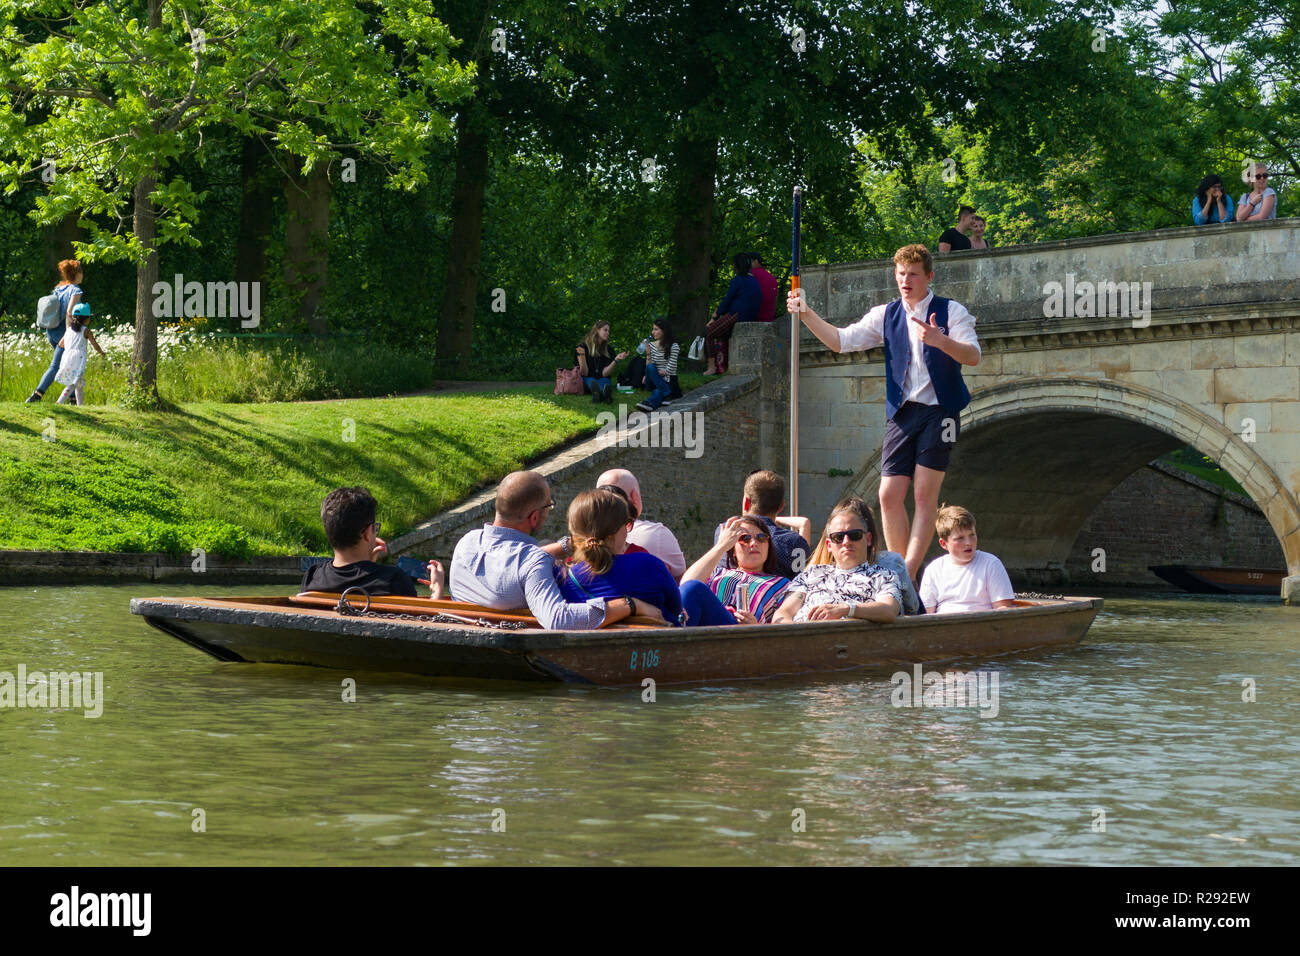 A group of tourists taking a guided tour in a punt boat with chauffeur talking to them, Cambridge, UK Stock Photo